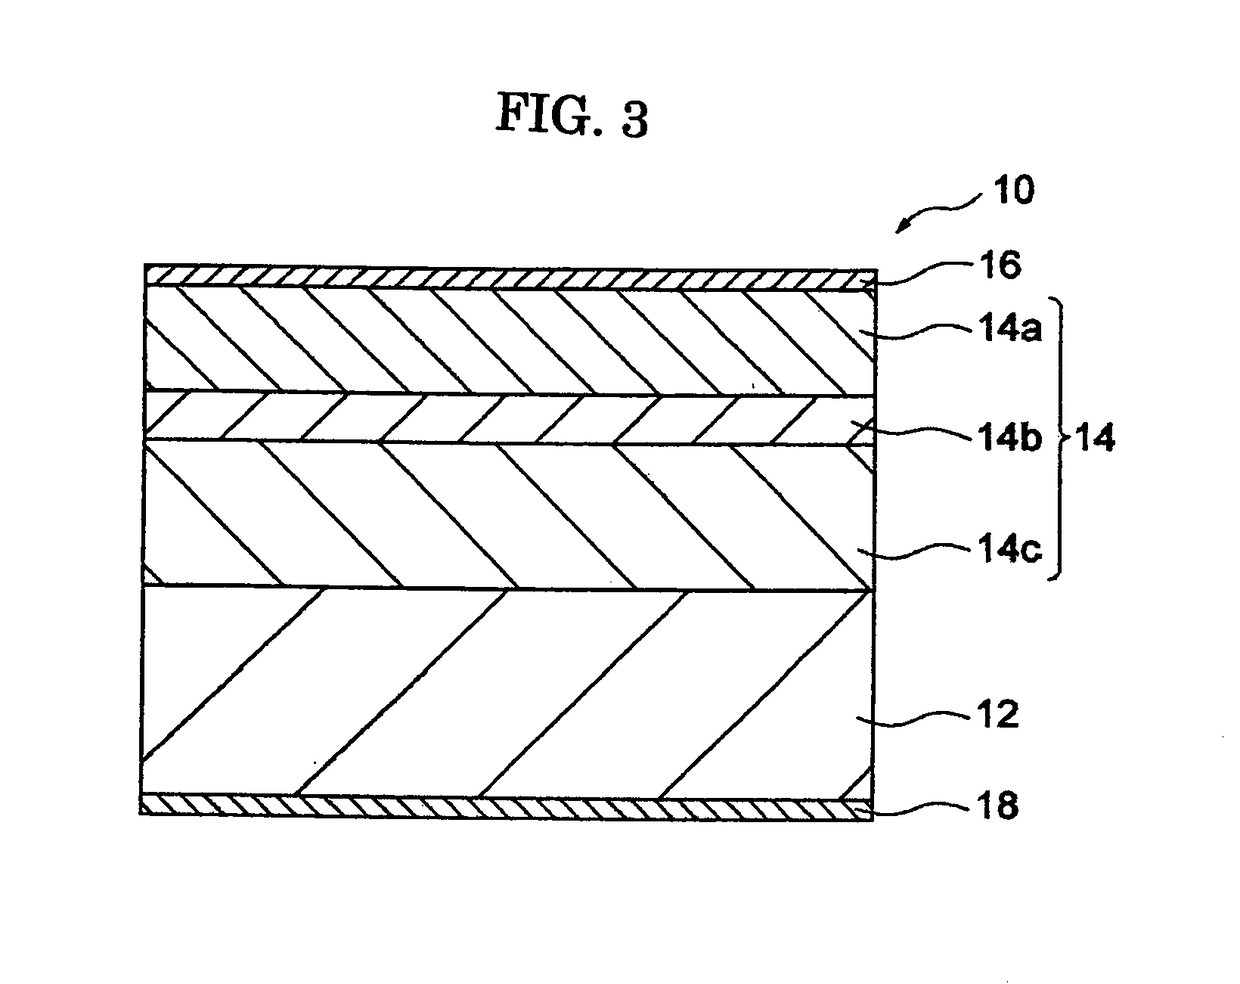 Free-standing substrate comprising polycrystalline group 13 element nitride and light-emitting element using same